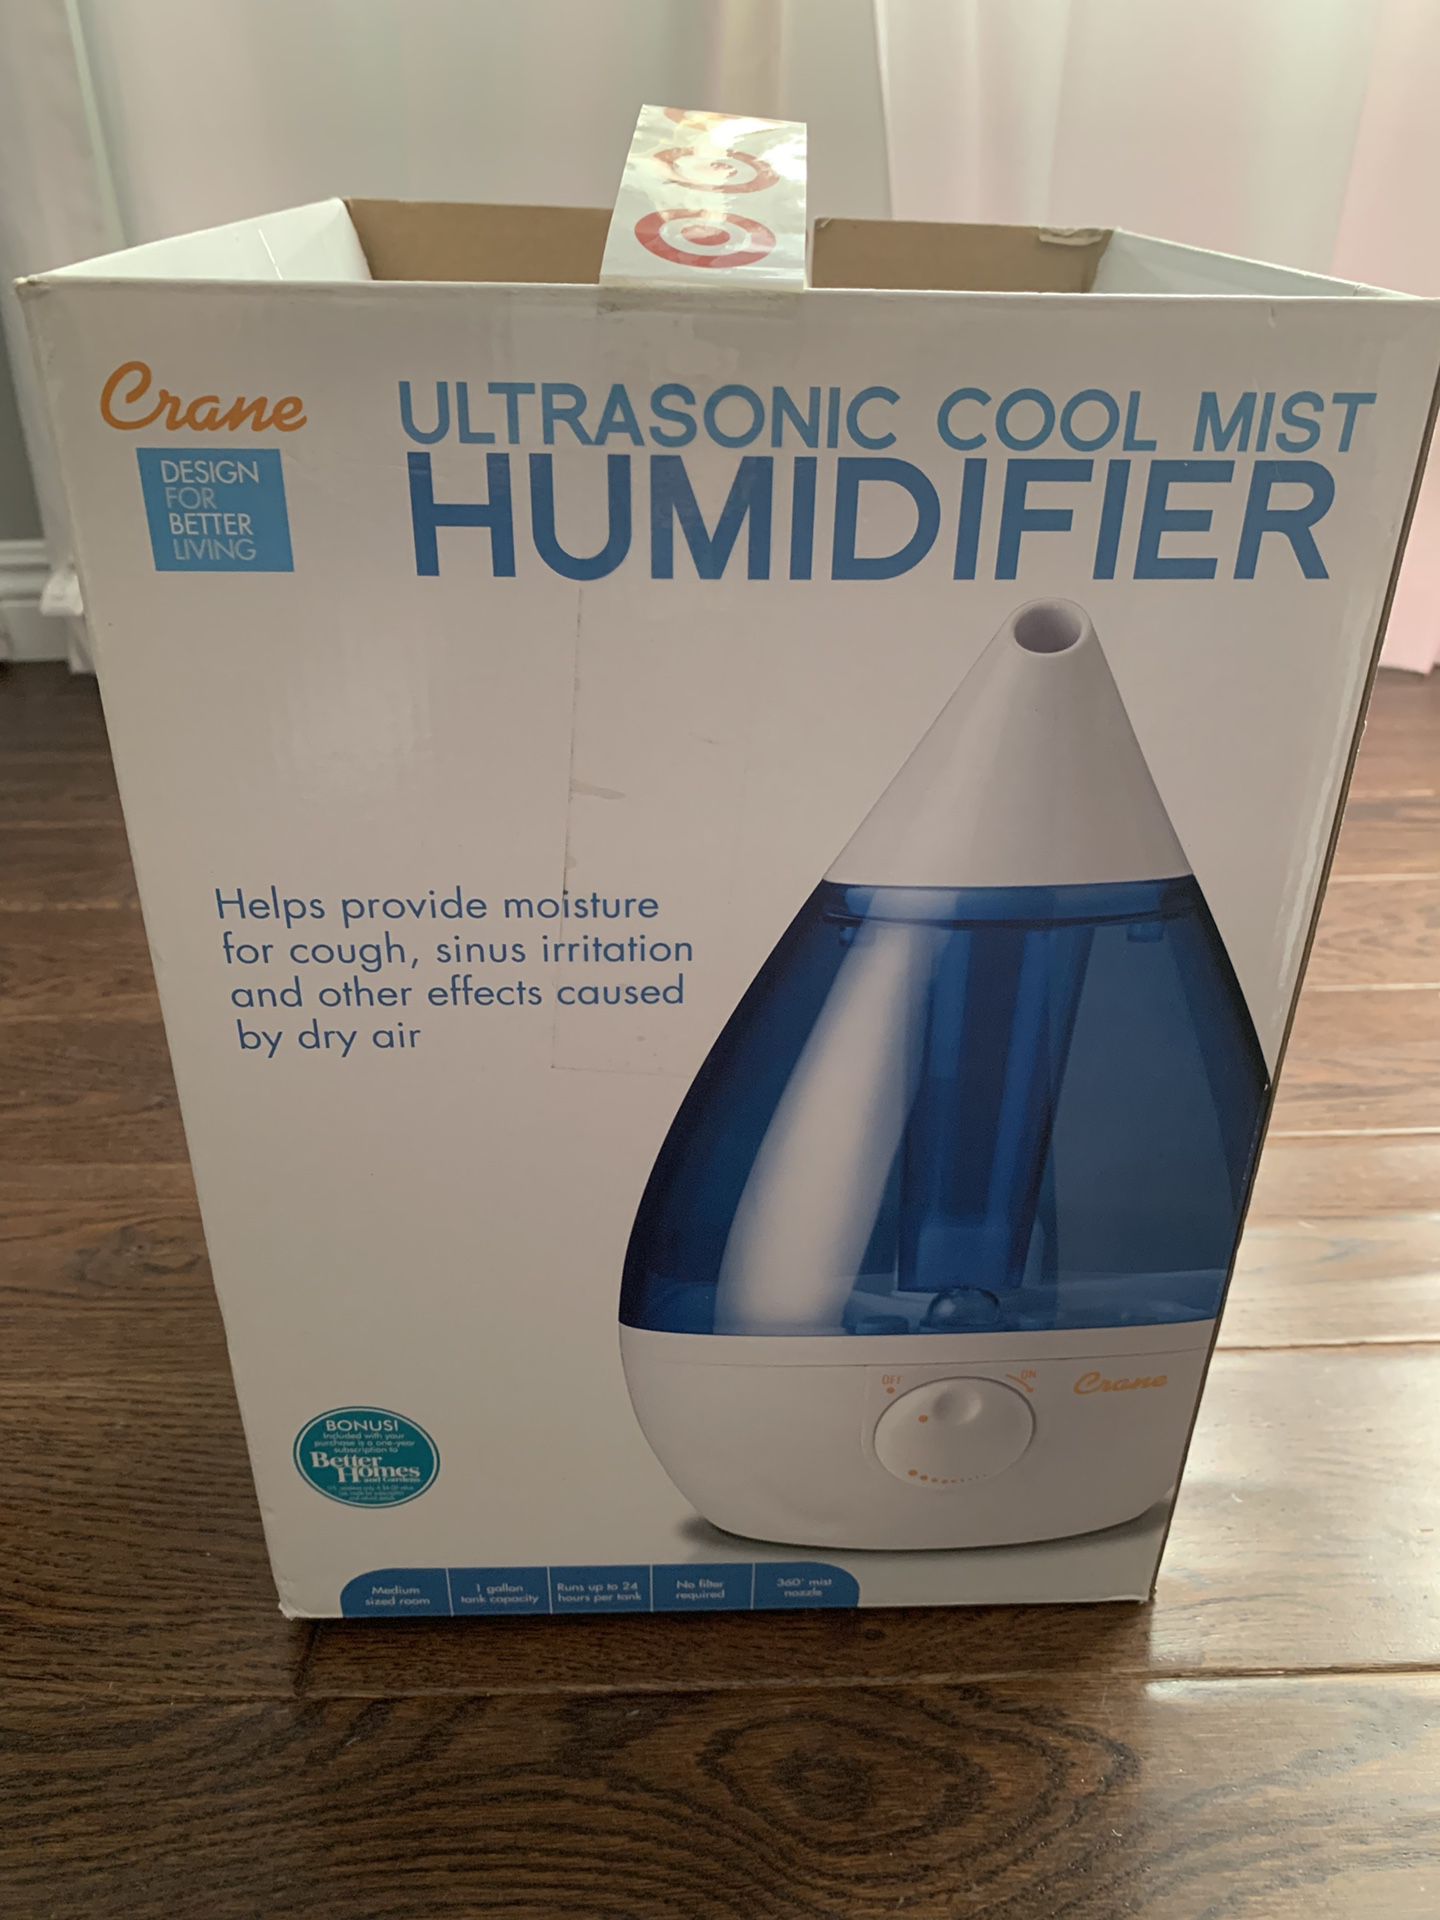 Humidifier for Sale